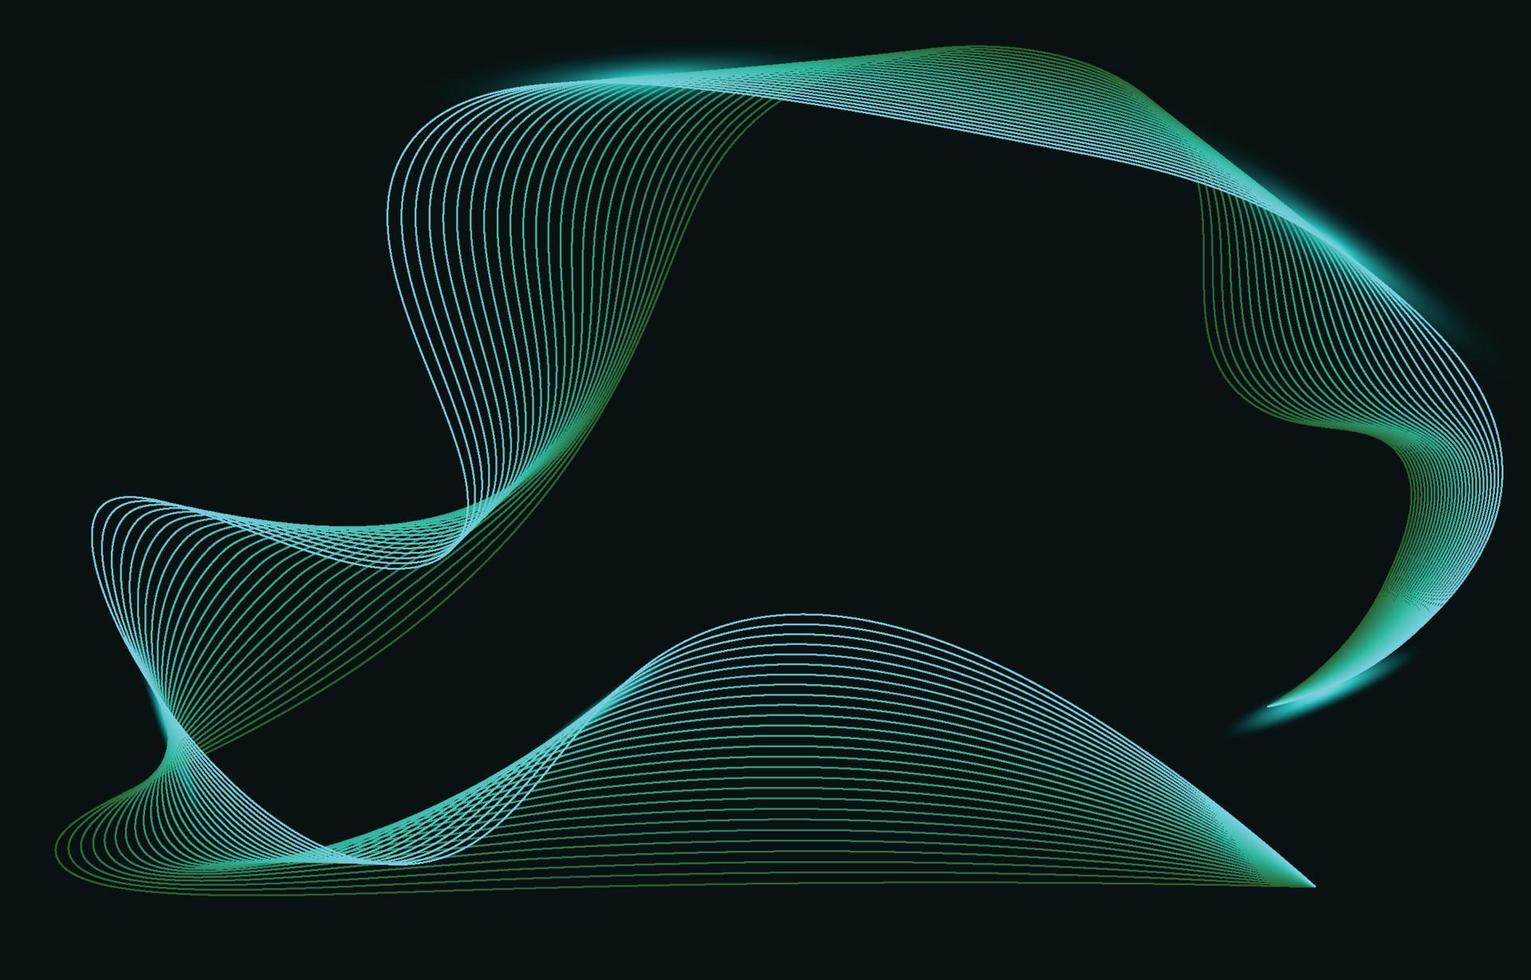 Abstract background, line wave element, sound spectrum equalizer wallpaper, vector futuristic particle technology illustration.